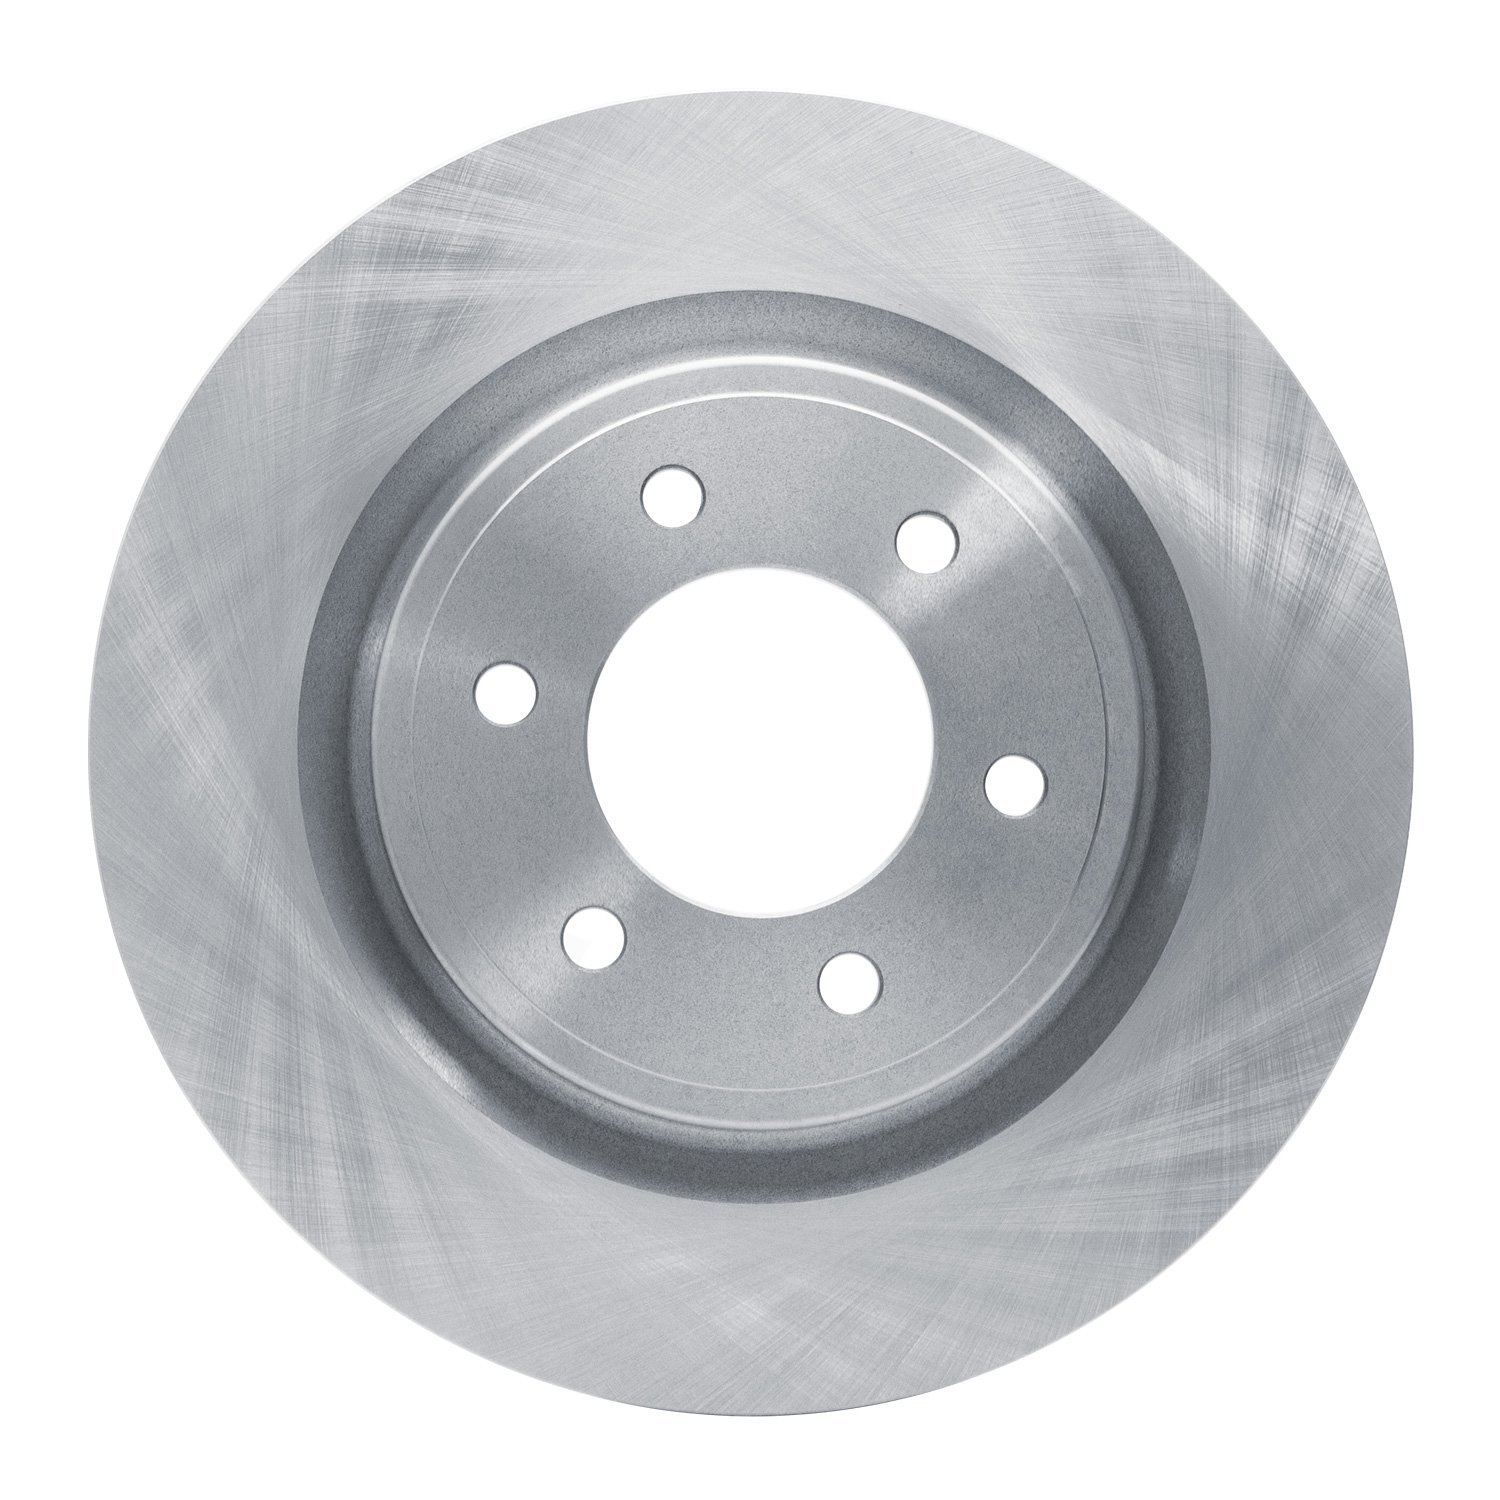 600-54300 Brake Rotor, Fits Select Ford/Lincoln/Mercury/Mazda, Position: Front